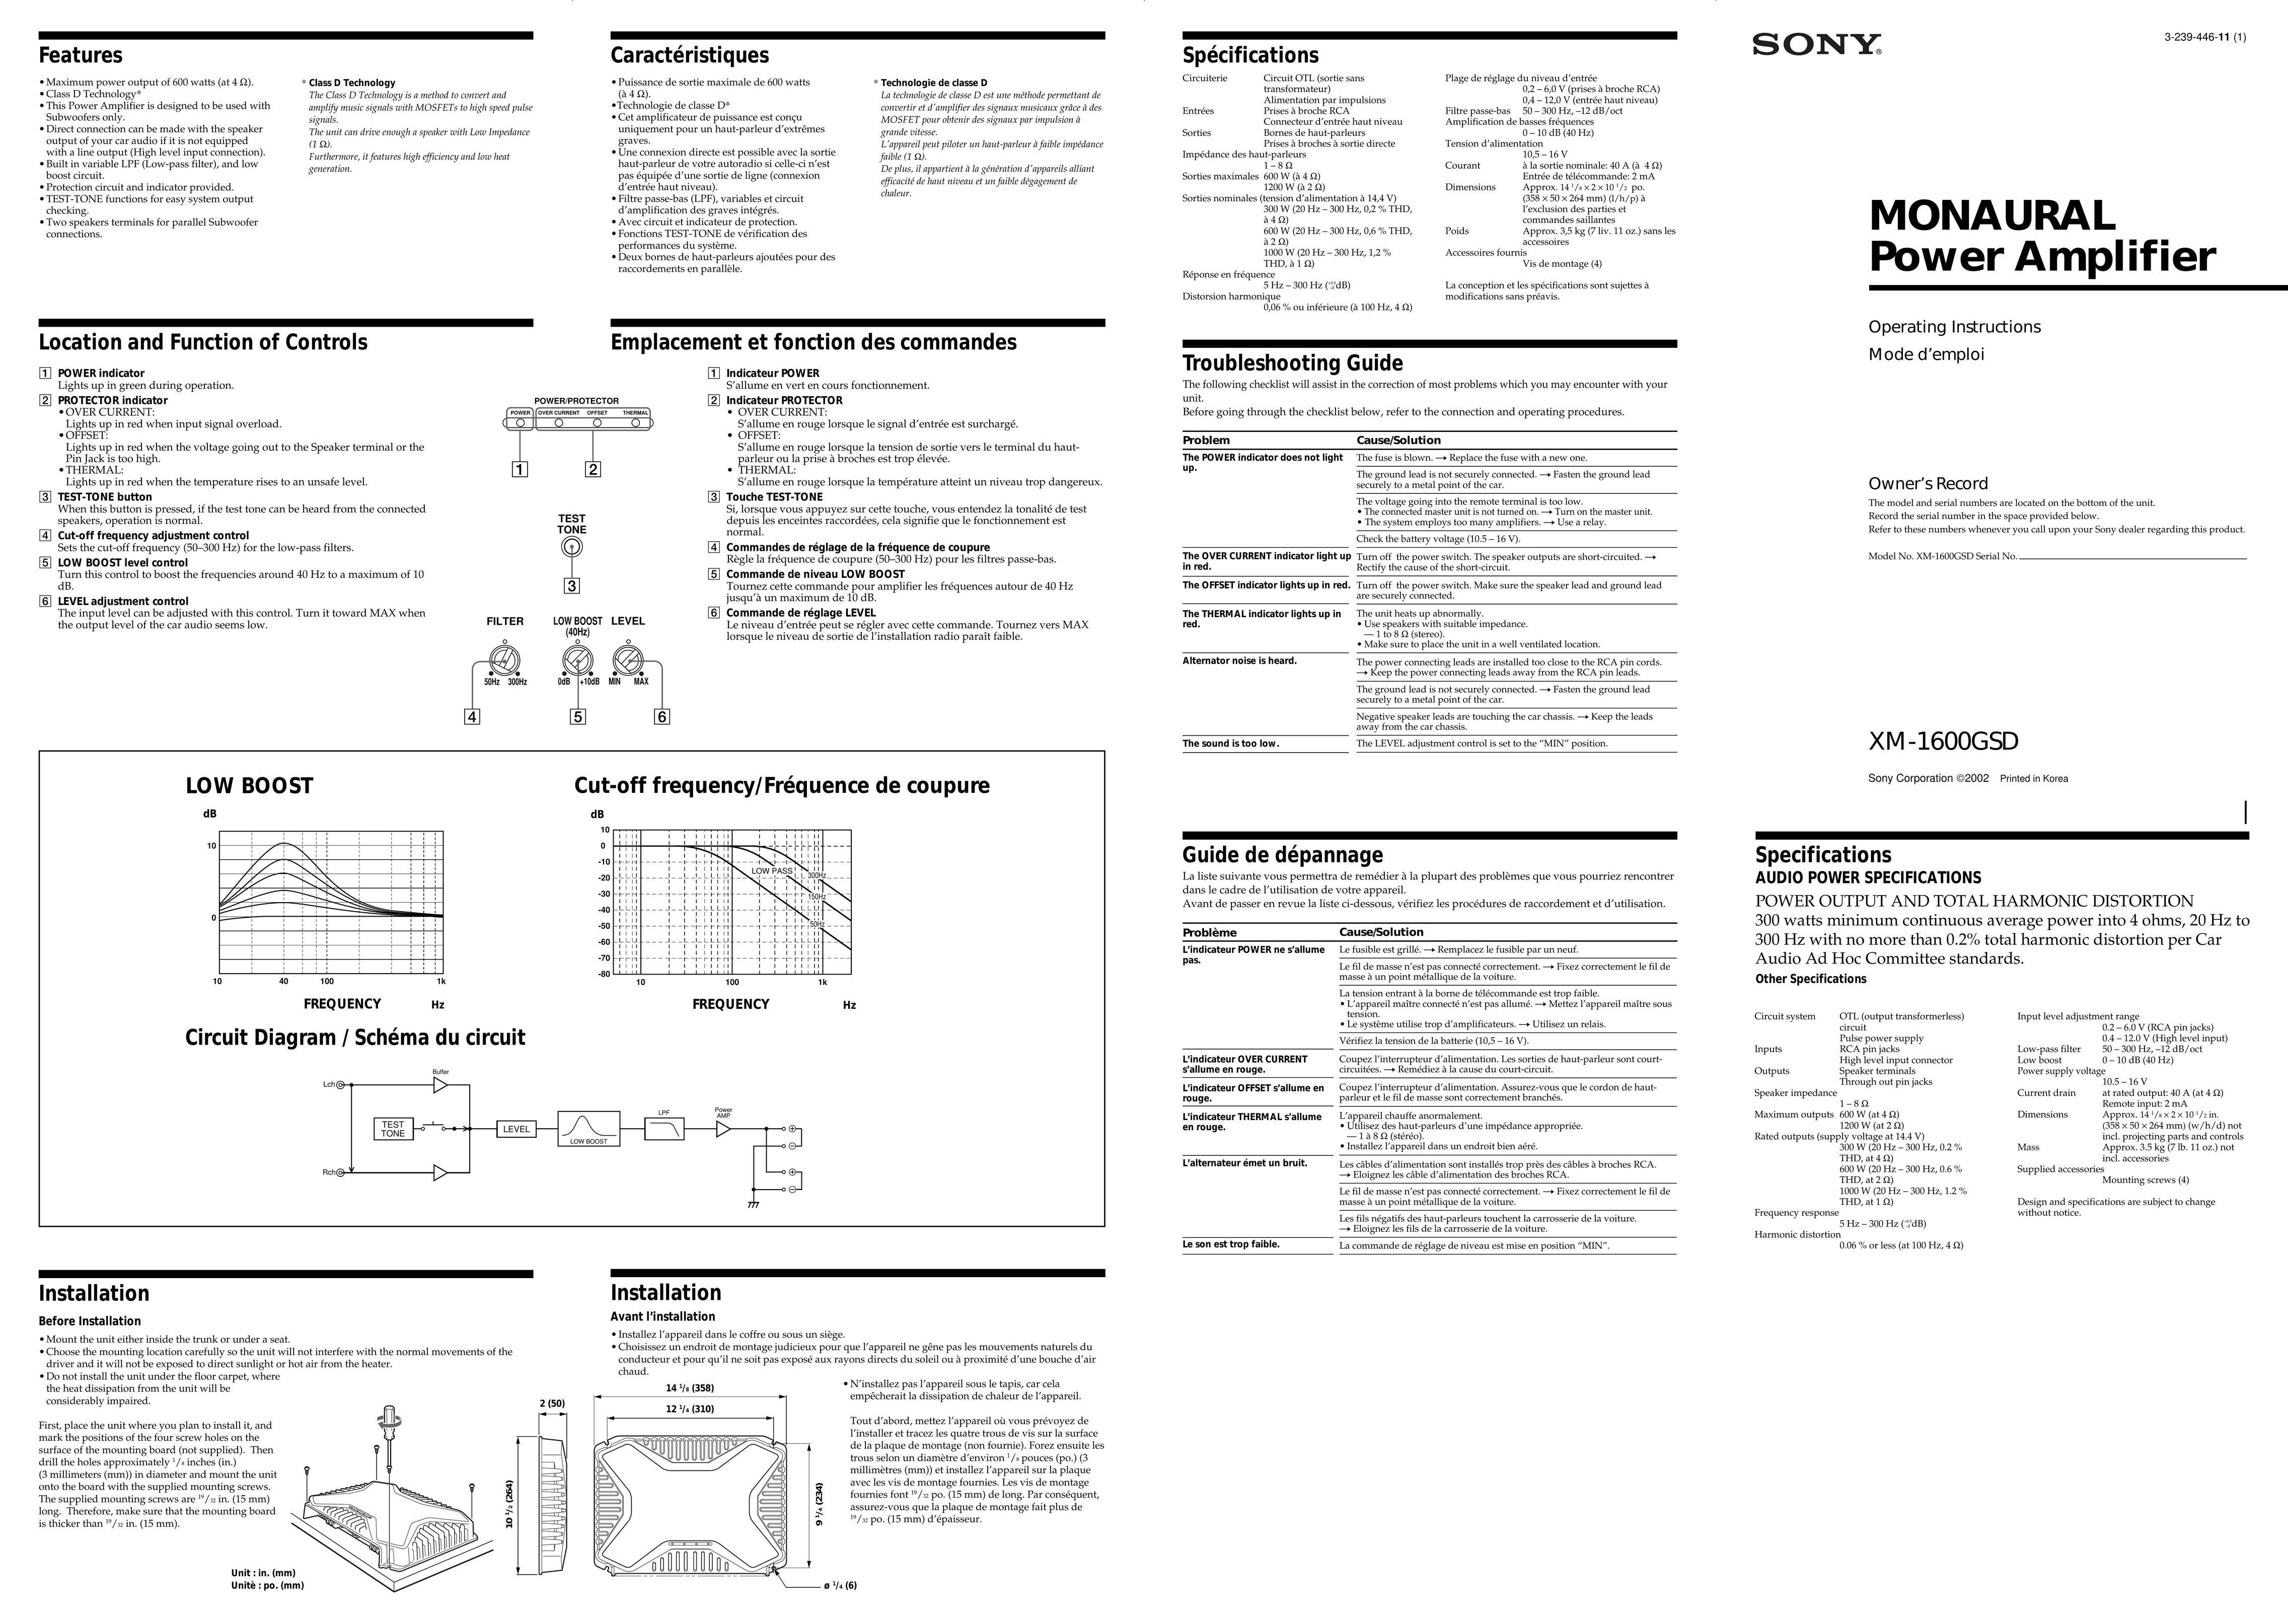 Sony XM-1600GSD Stereo Amplifier User Manual